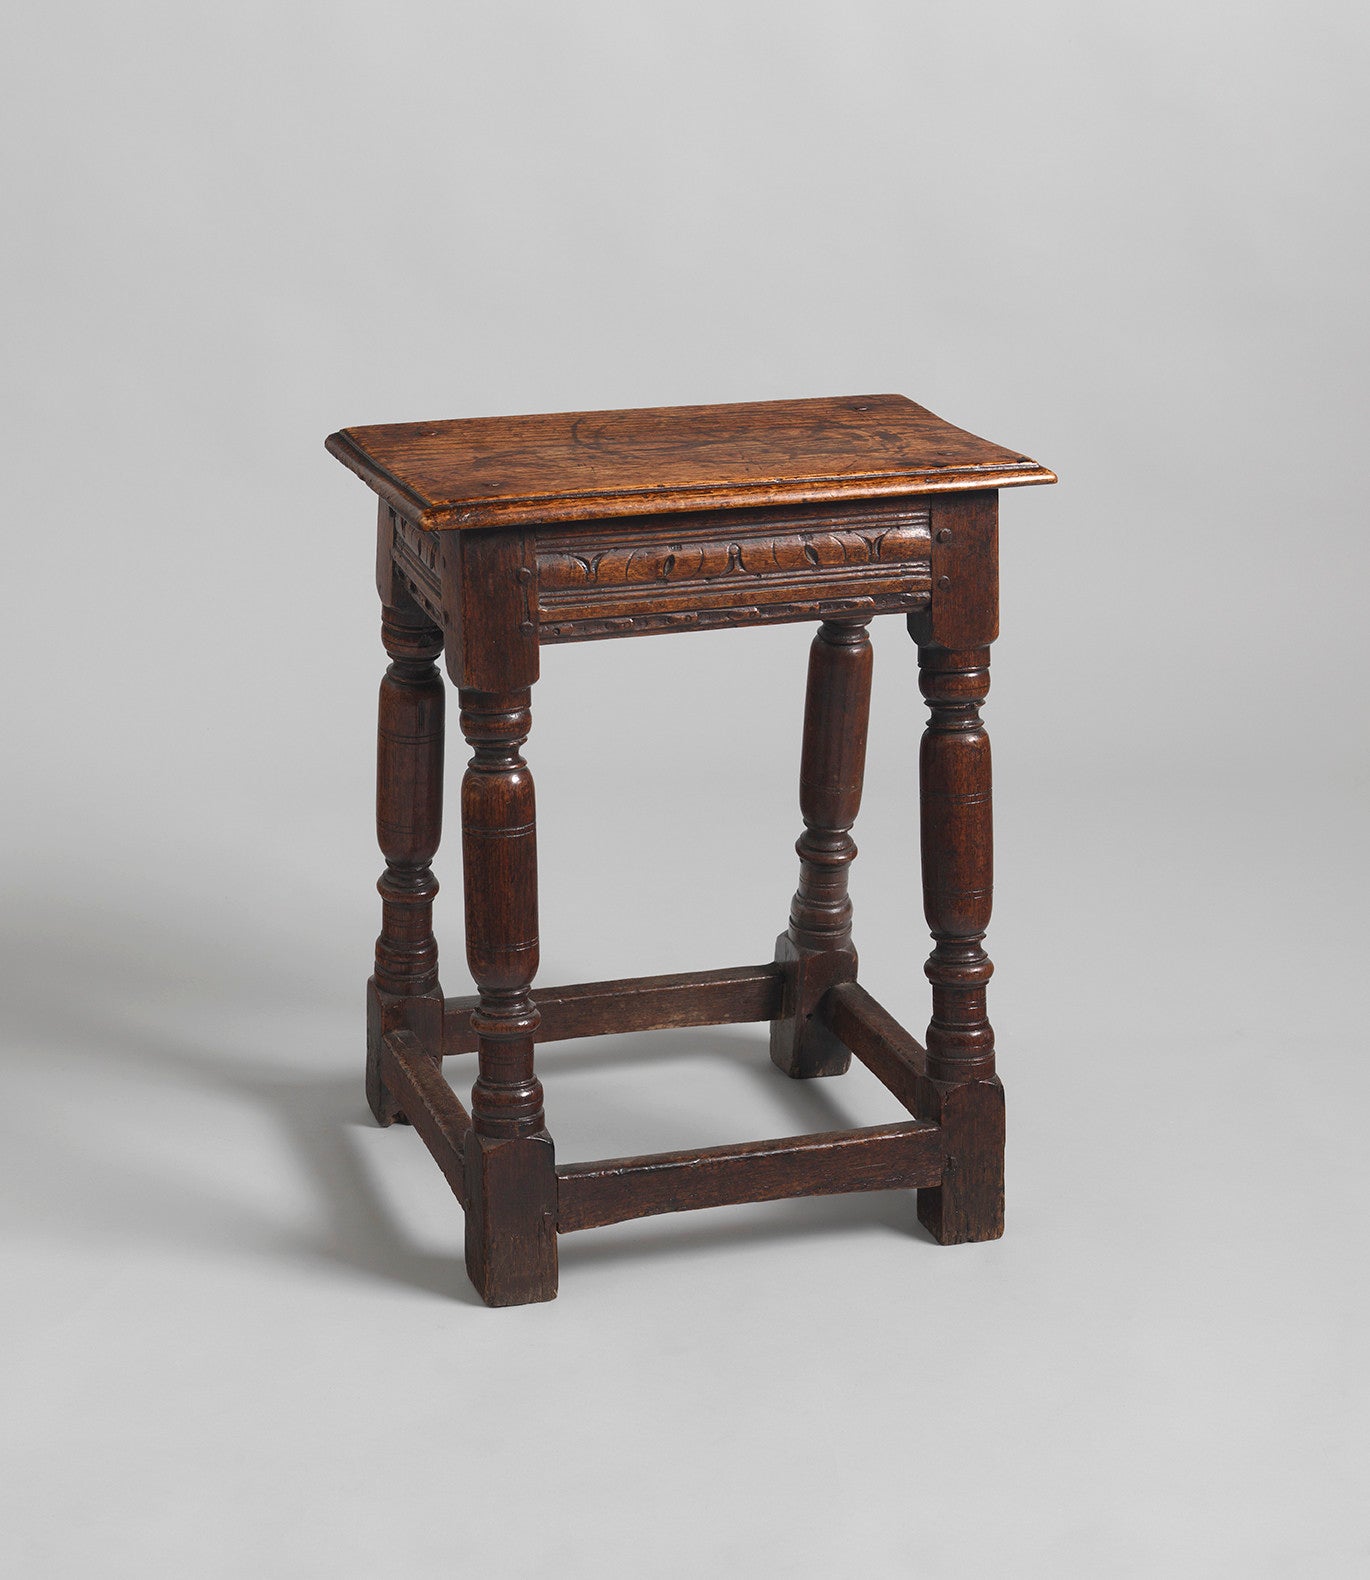 Charles II Period Joint Stool